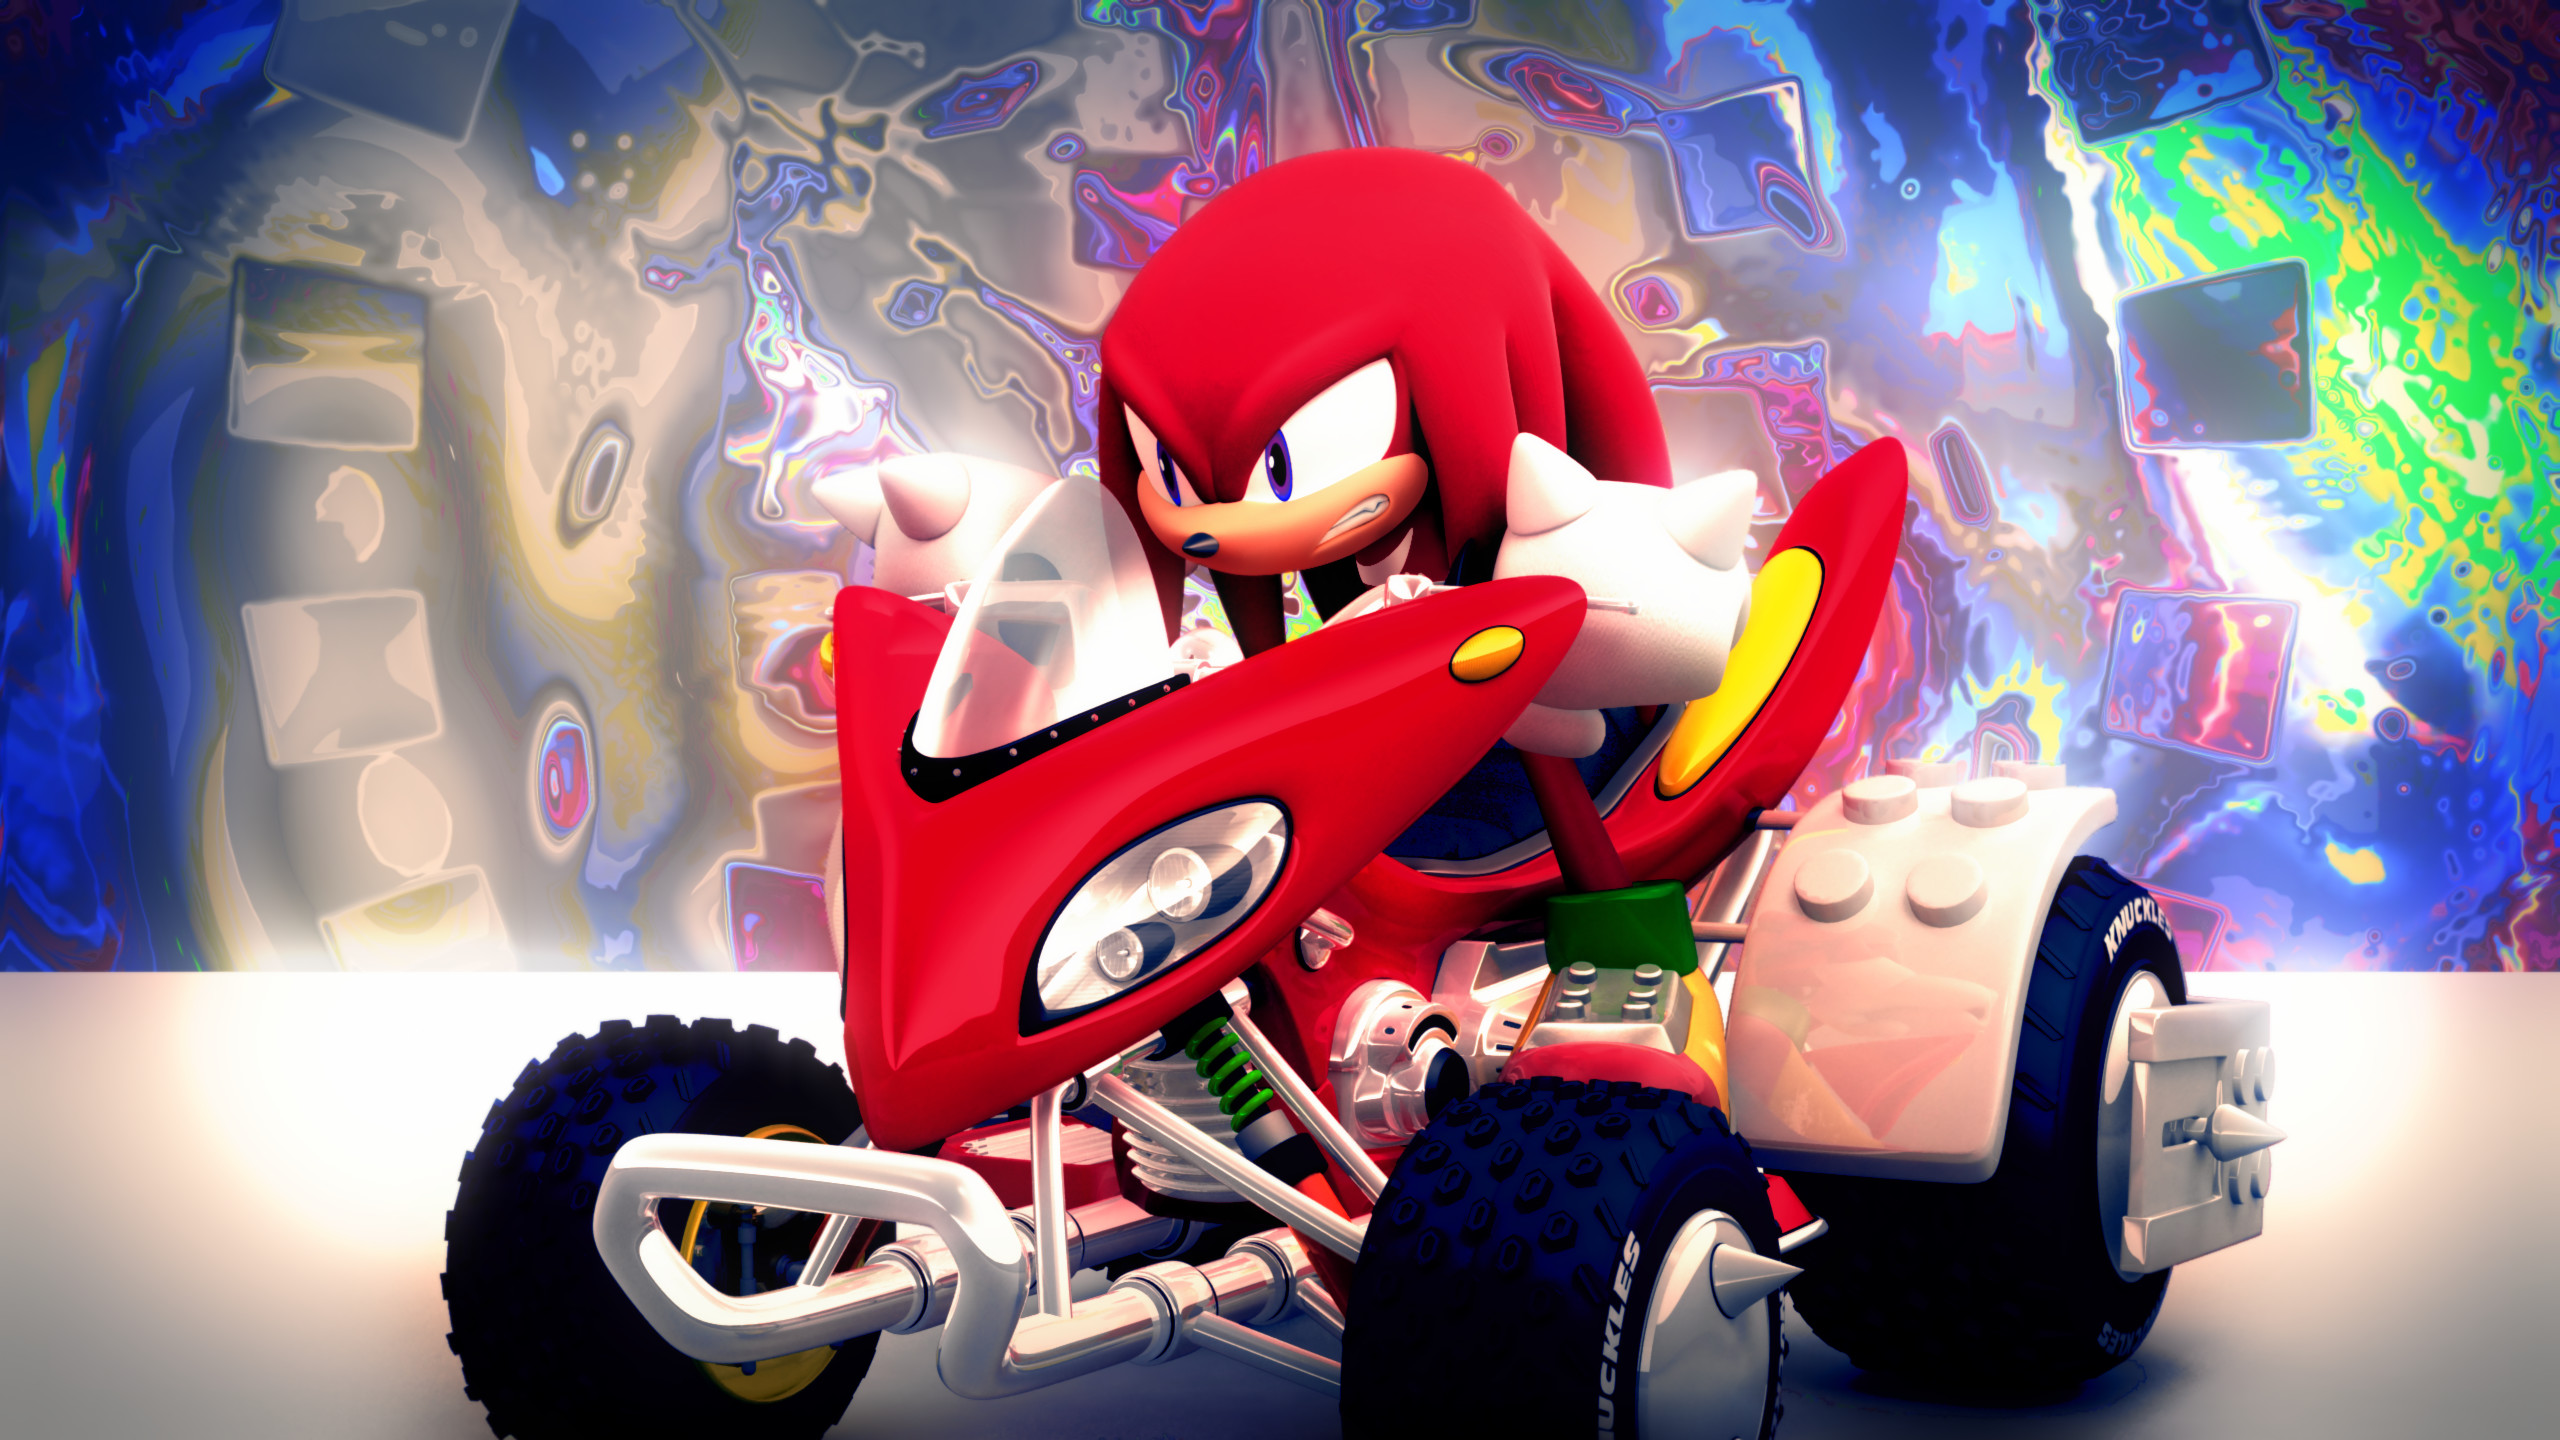 2560x1440 ... Knuckles the Echidna [51] by Light-Rock